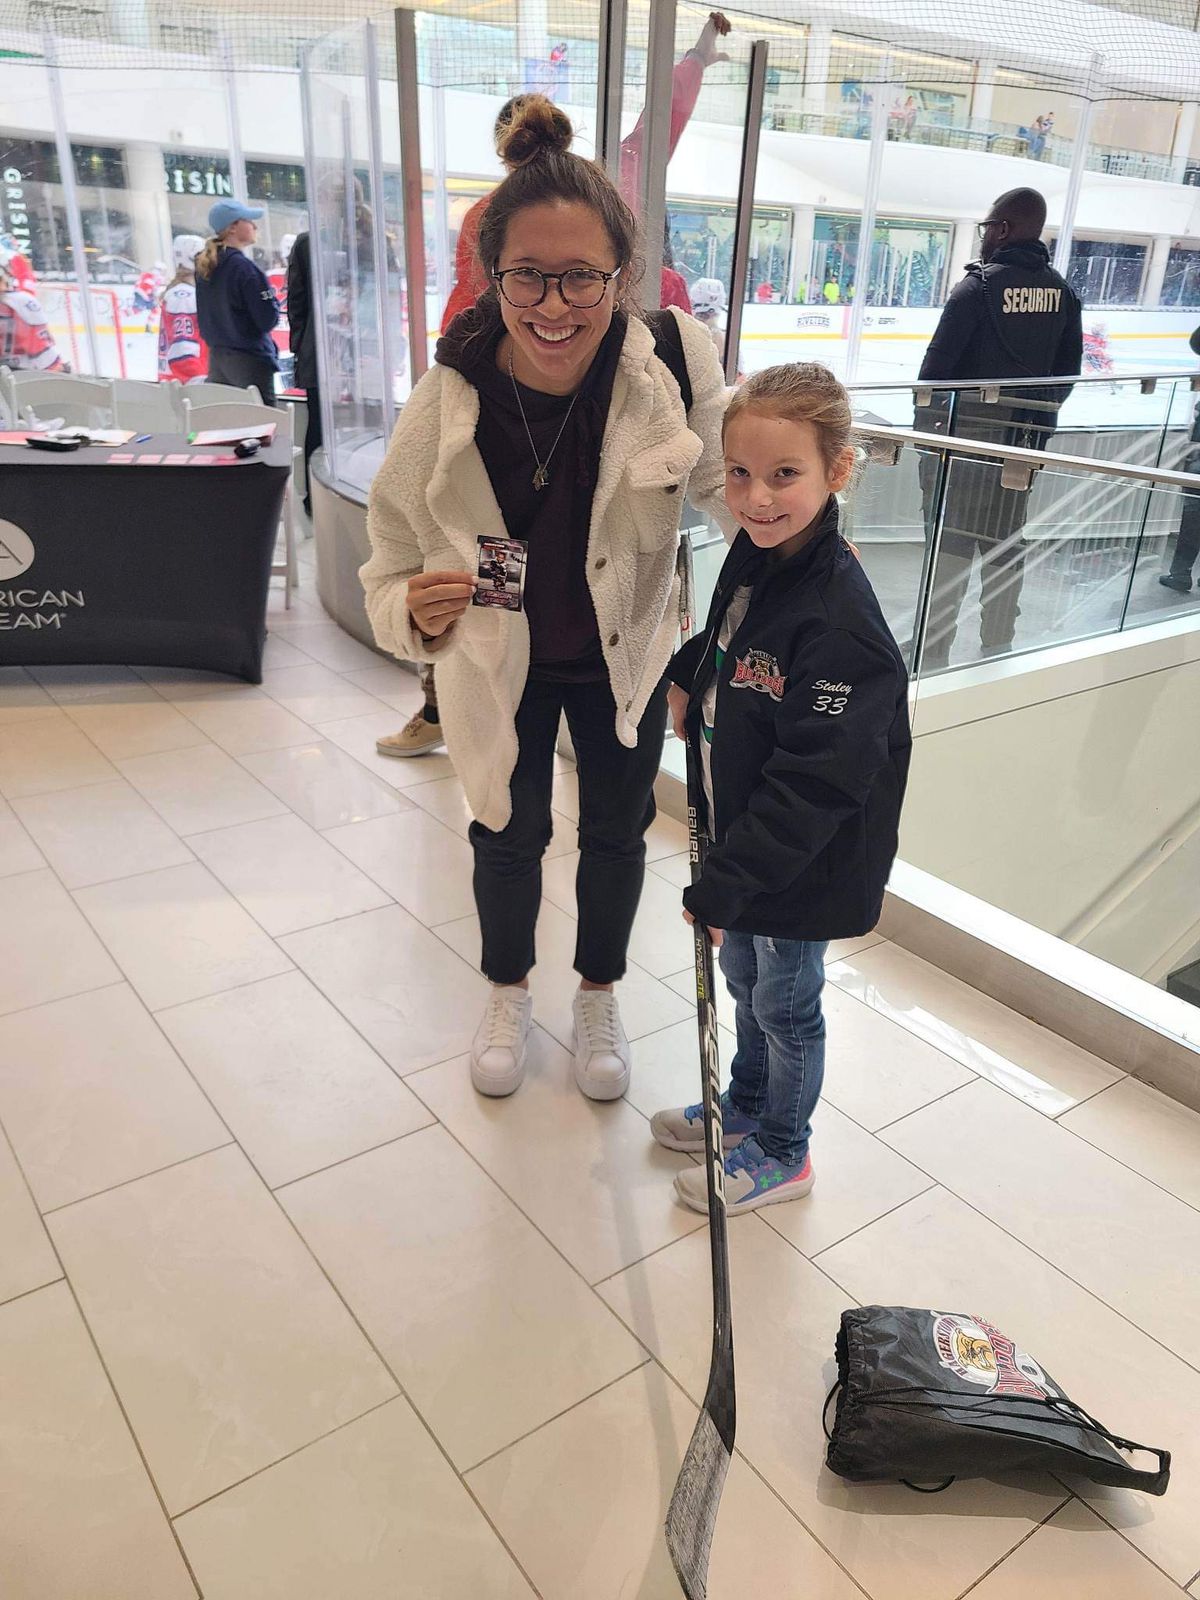 Connecticut’s Tori Sullivan poses with a young fan after a successful trade!